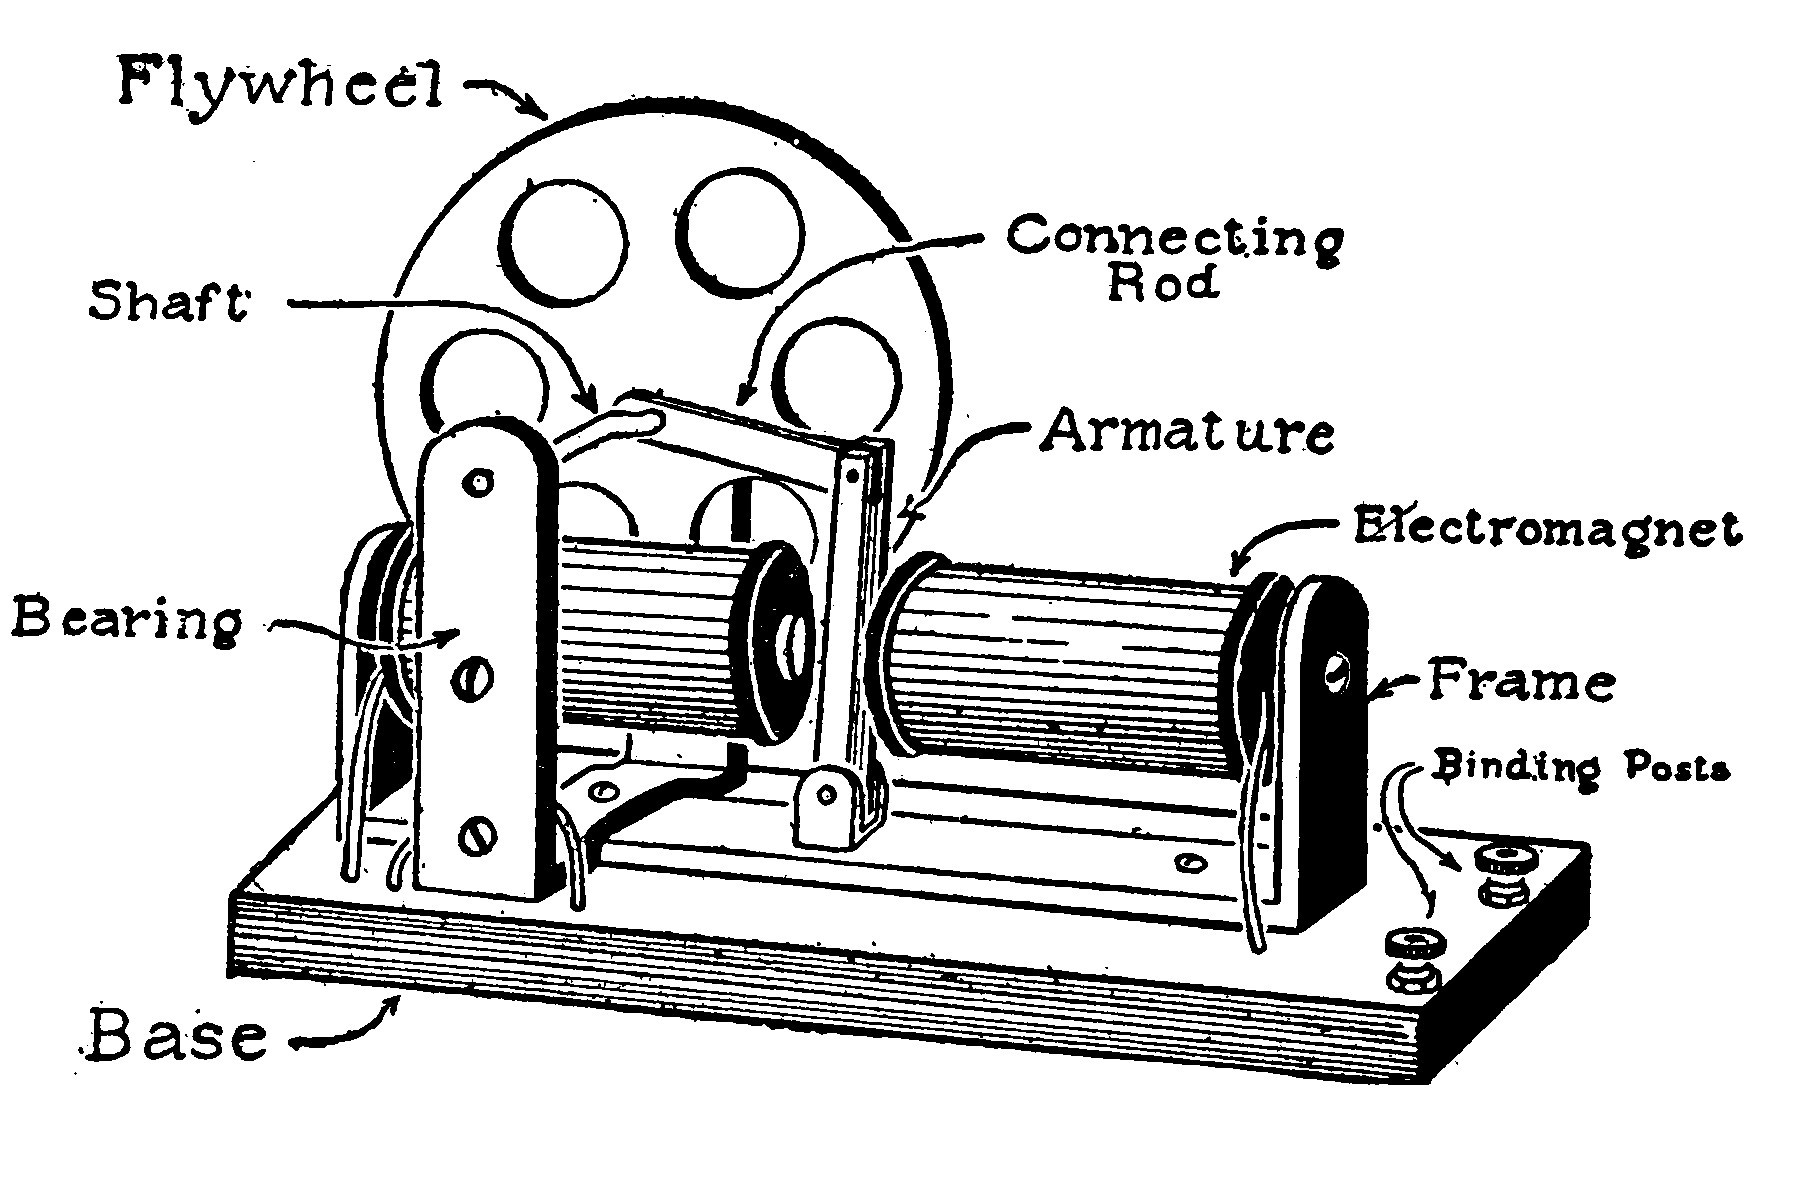 FIG. 50.—The completed Engine.